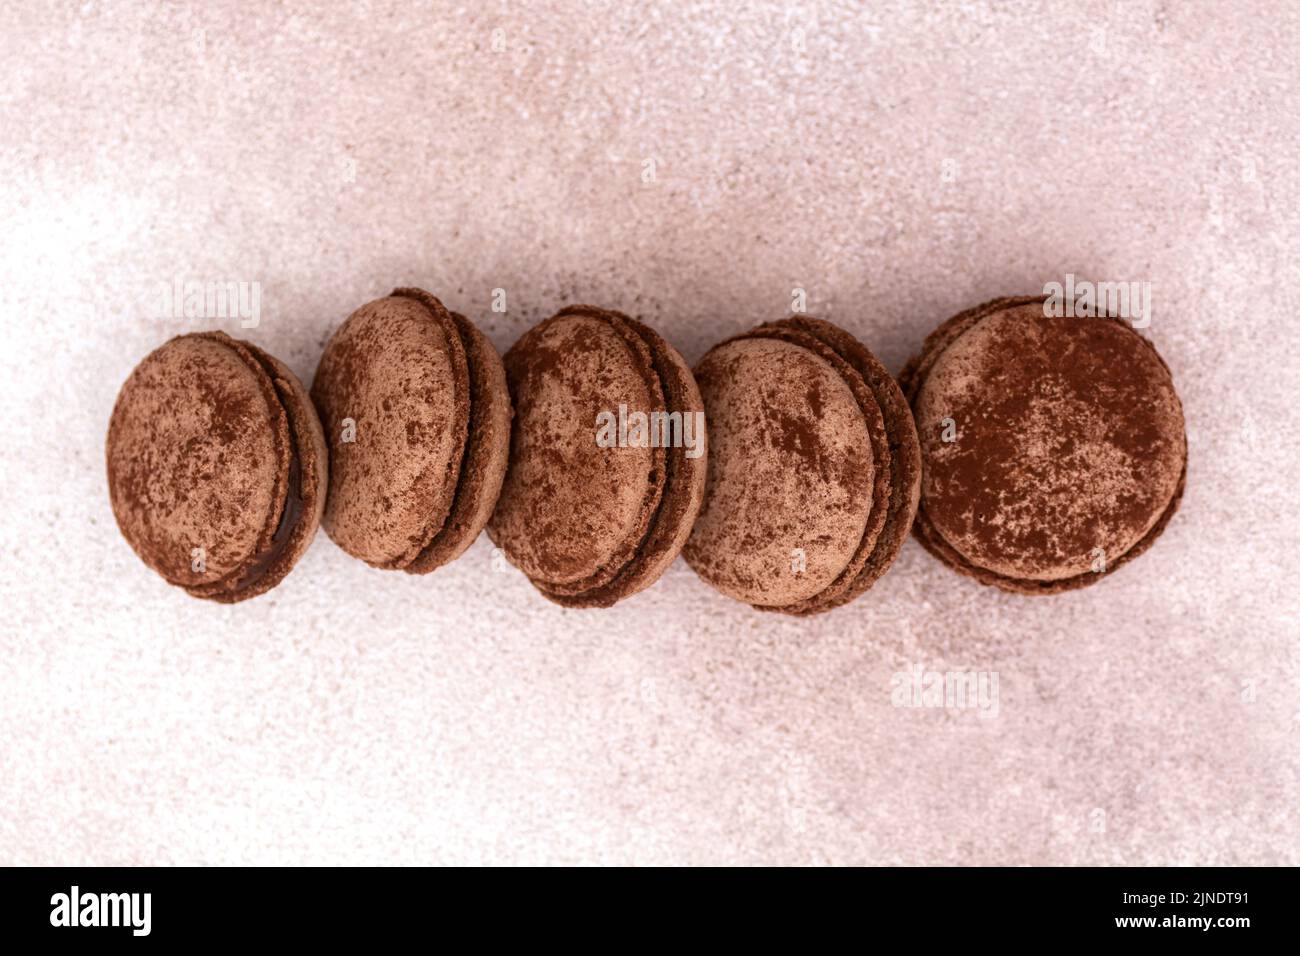 Chocolate french macaroons on a light background. Flat lay top view Stock Photo